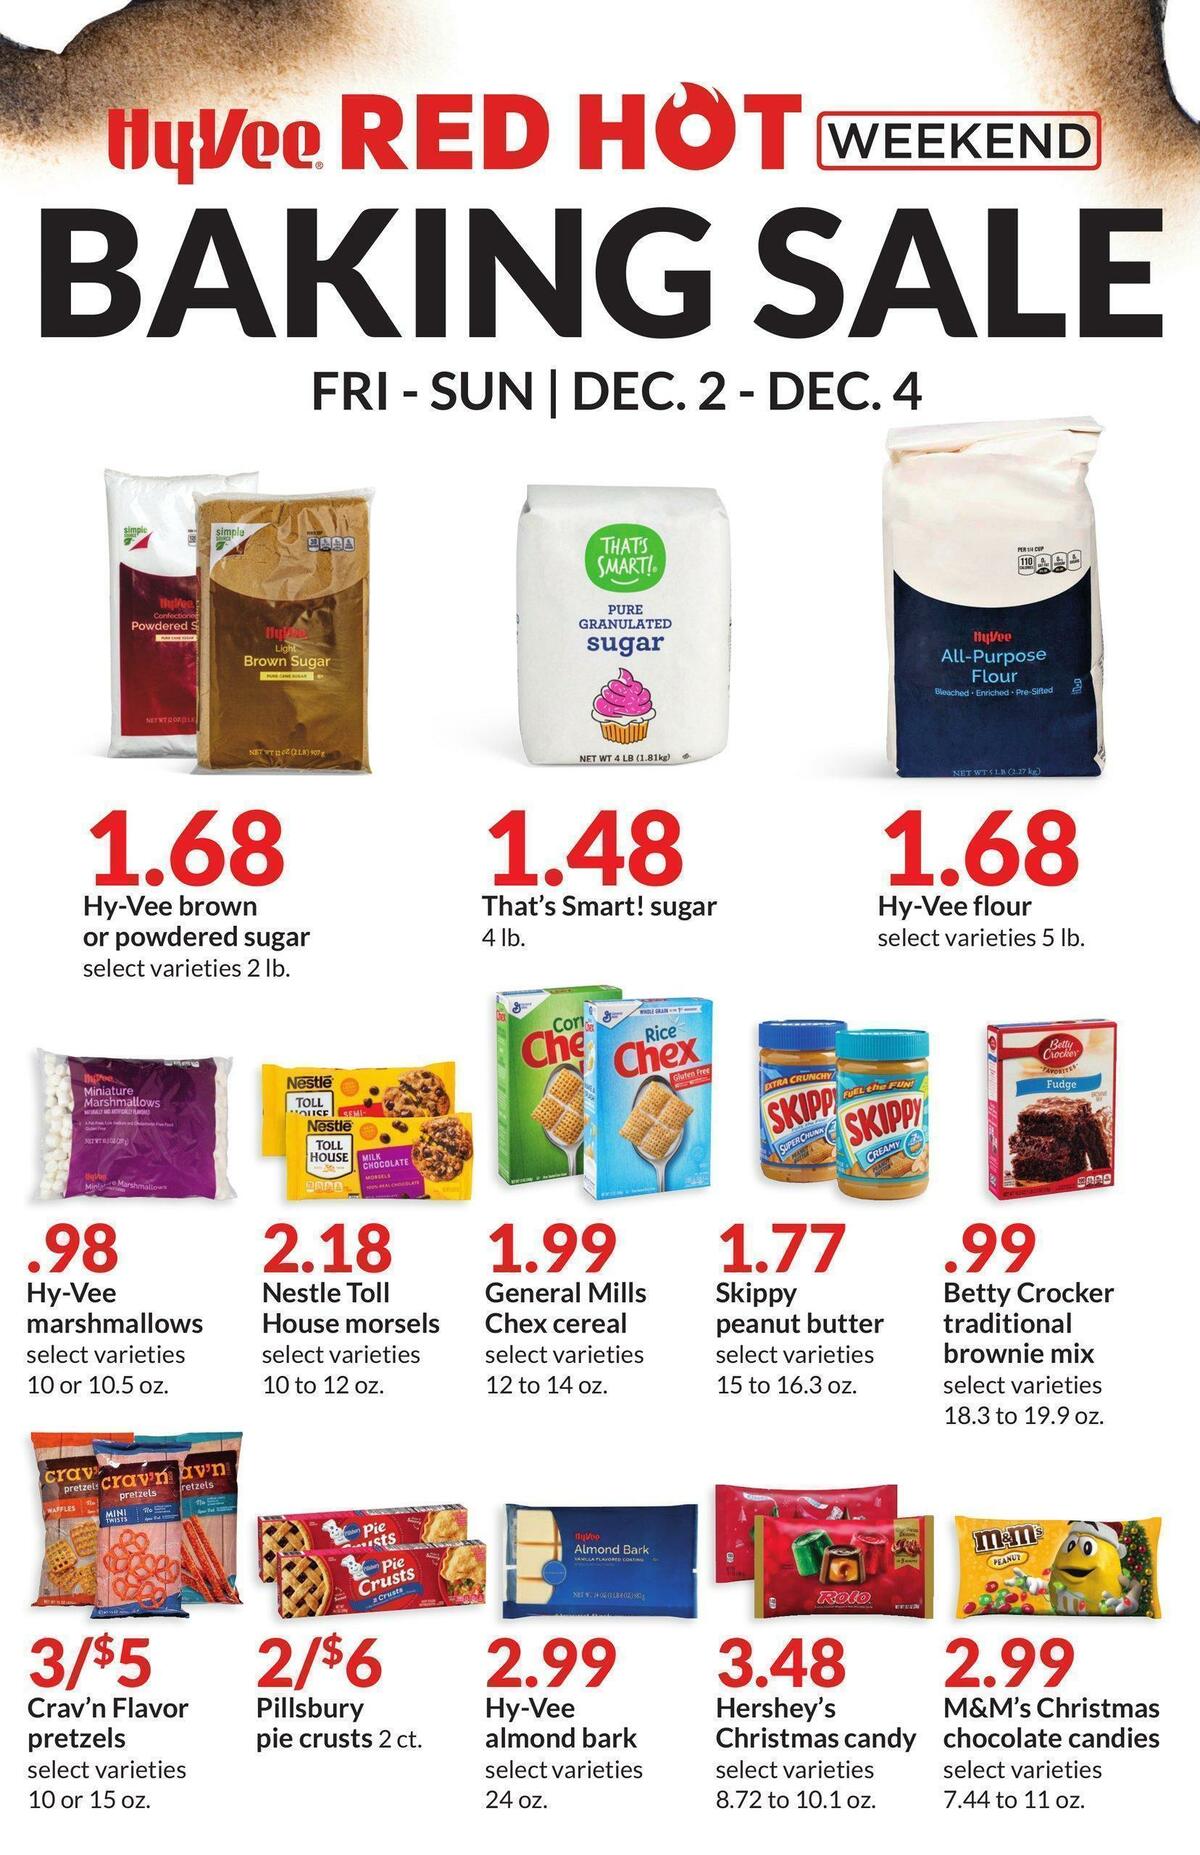 Hy-Vee Baking Sale Weekly Ad from December 2